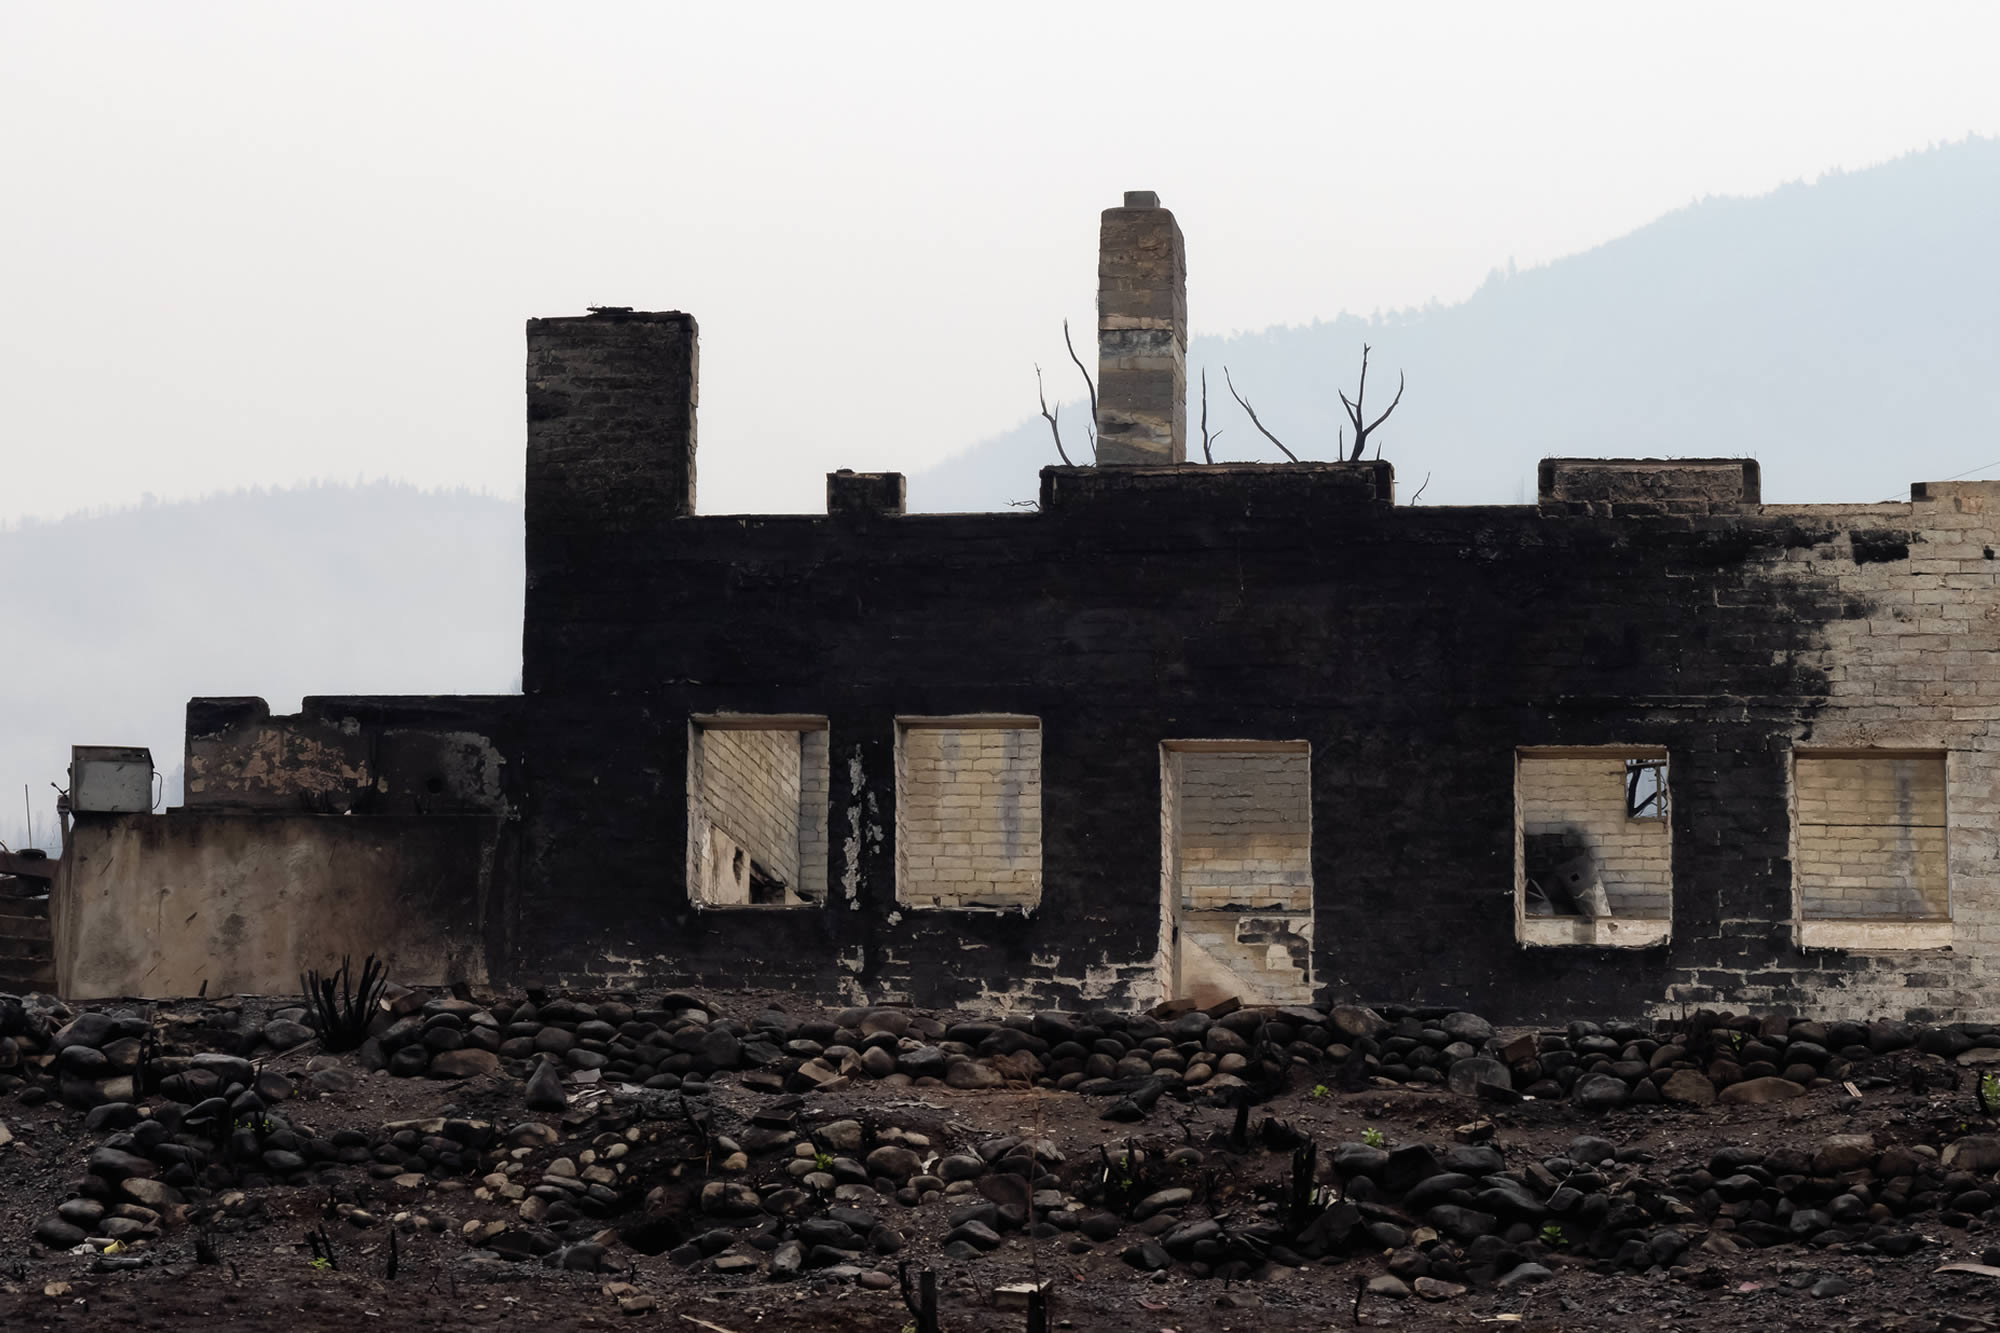 slater-vecchio-pursues-relief-for-individuals-impacted-by-wildfire-lytton